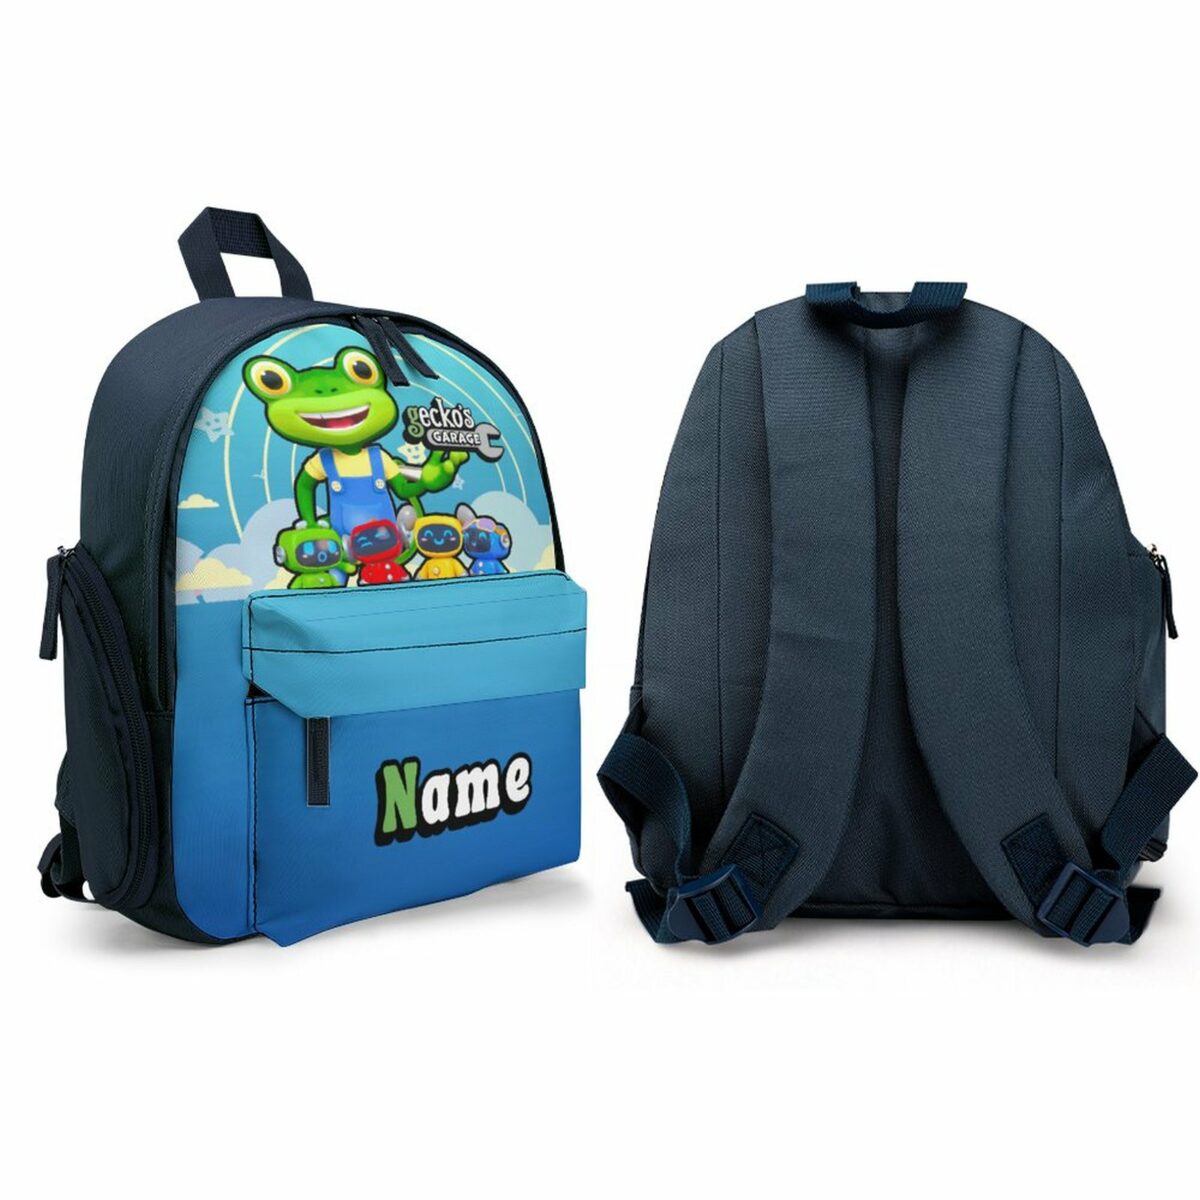 Personalized Gecko’s Garage Characters Blue Children’s School Bag – Toddler’s Backpack Cool Kiddo 16